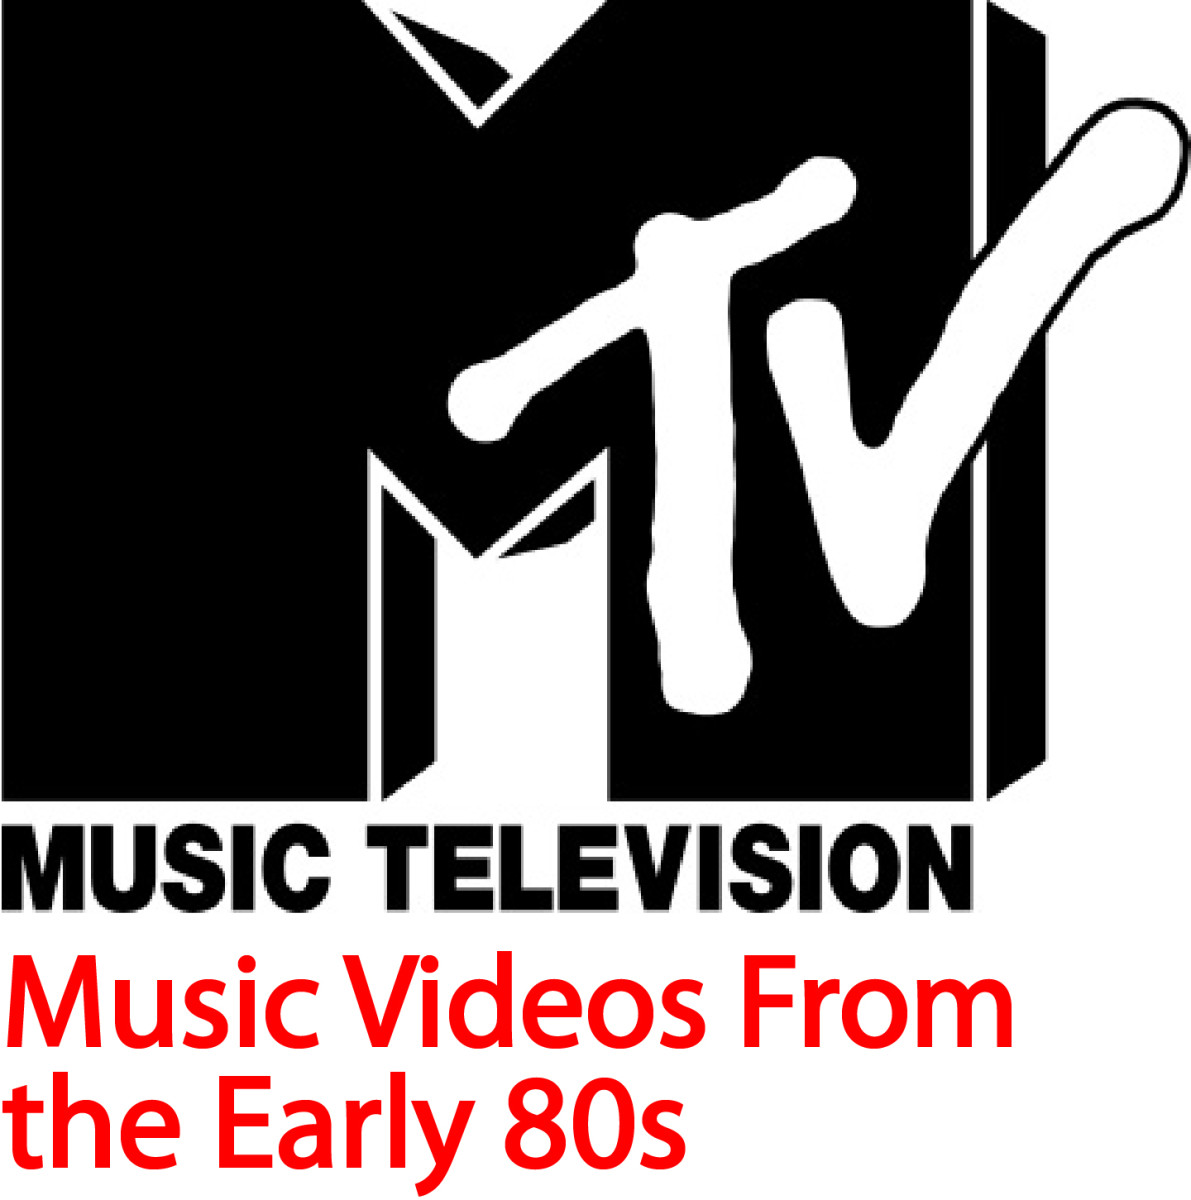 11 MTV Music Videos From the Early '80s